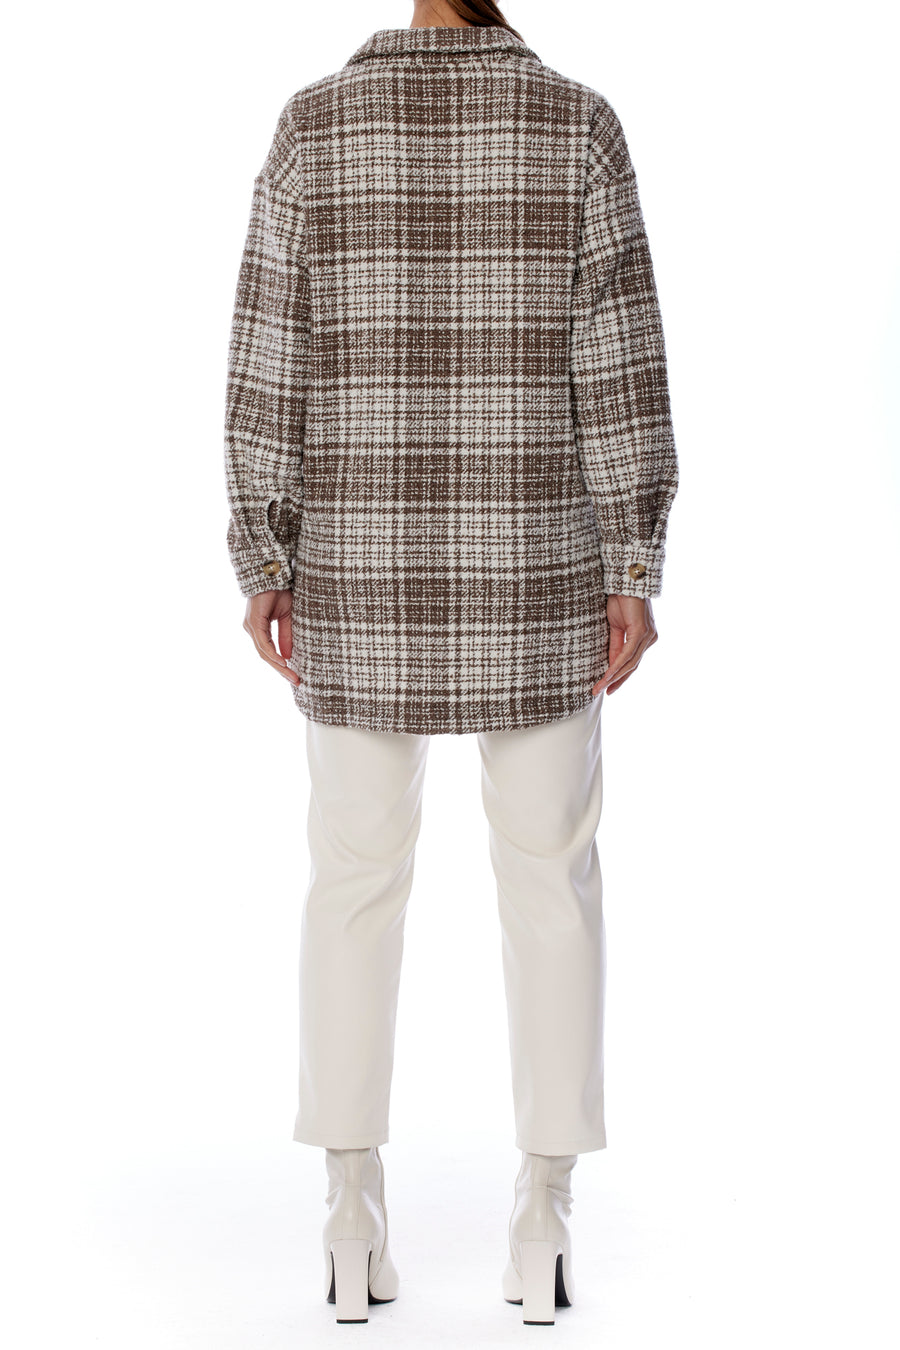 Cozy coco and white plaid button up top with shirttail hem, collar and front and side pockets